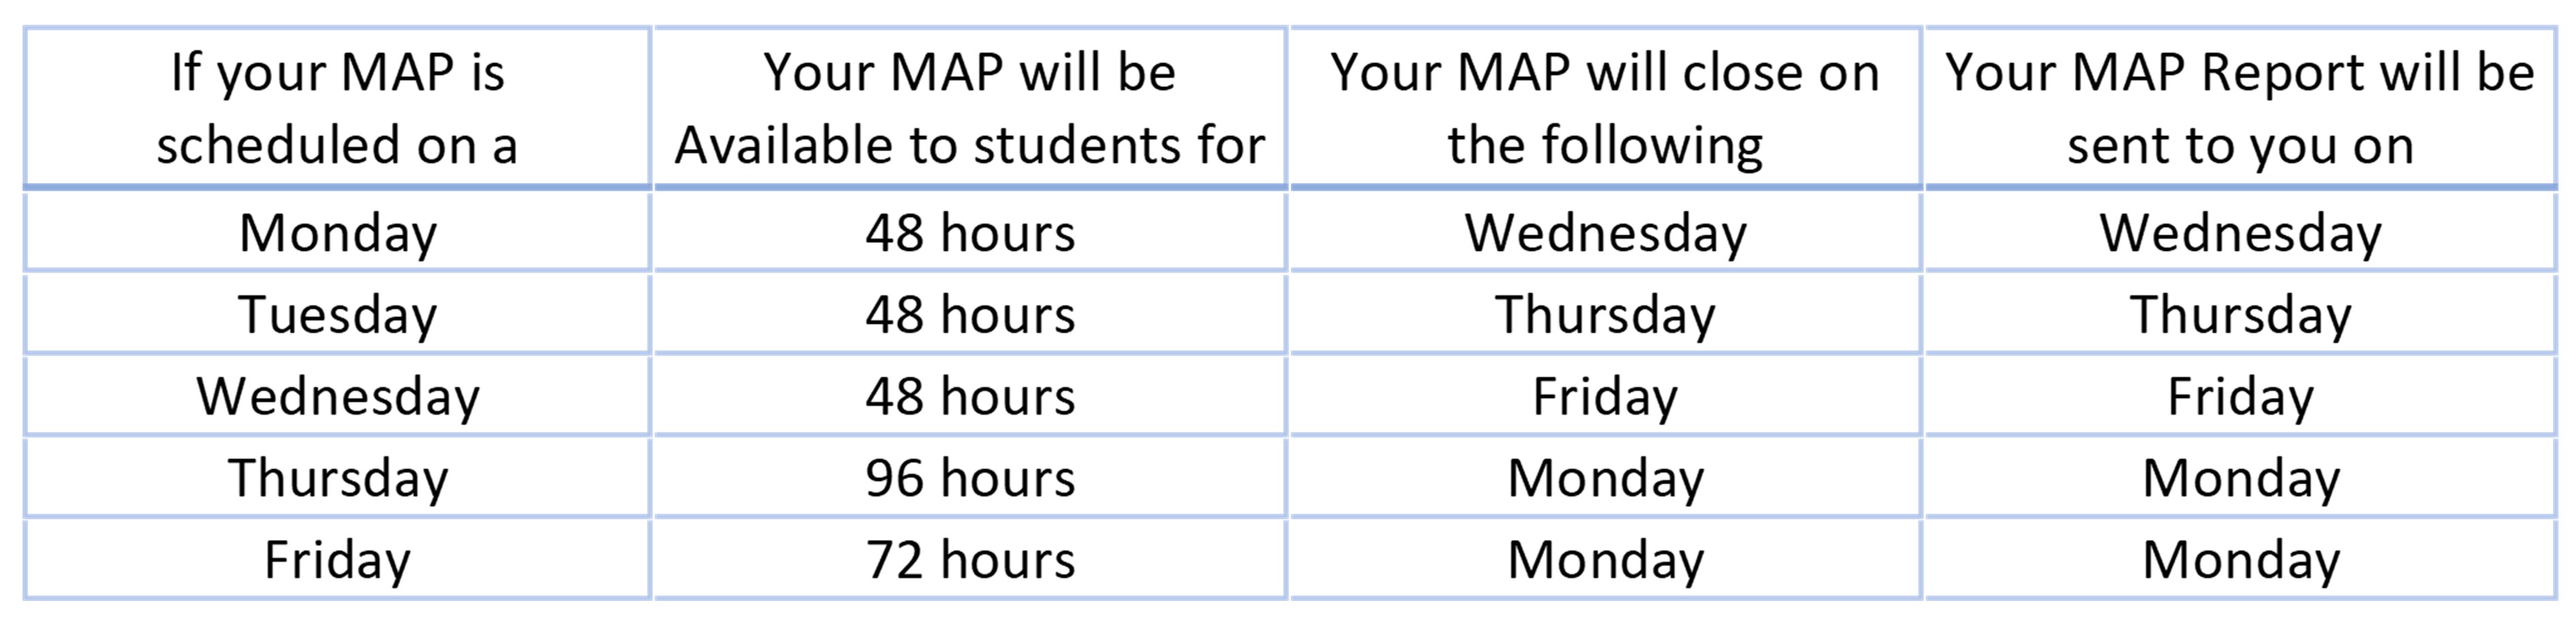 Table showing when MAP report is available based on weekday selected